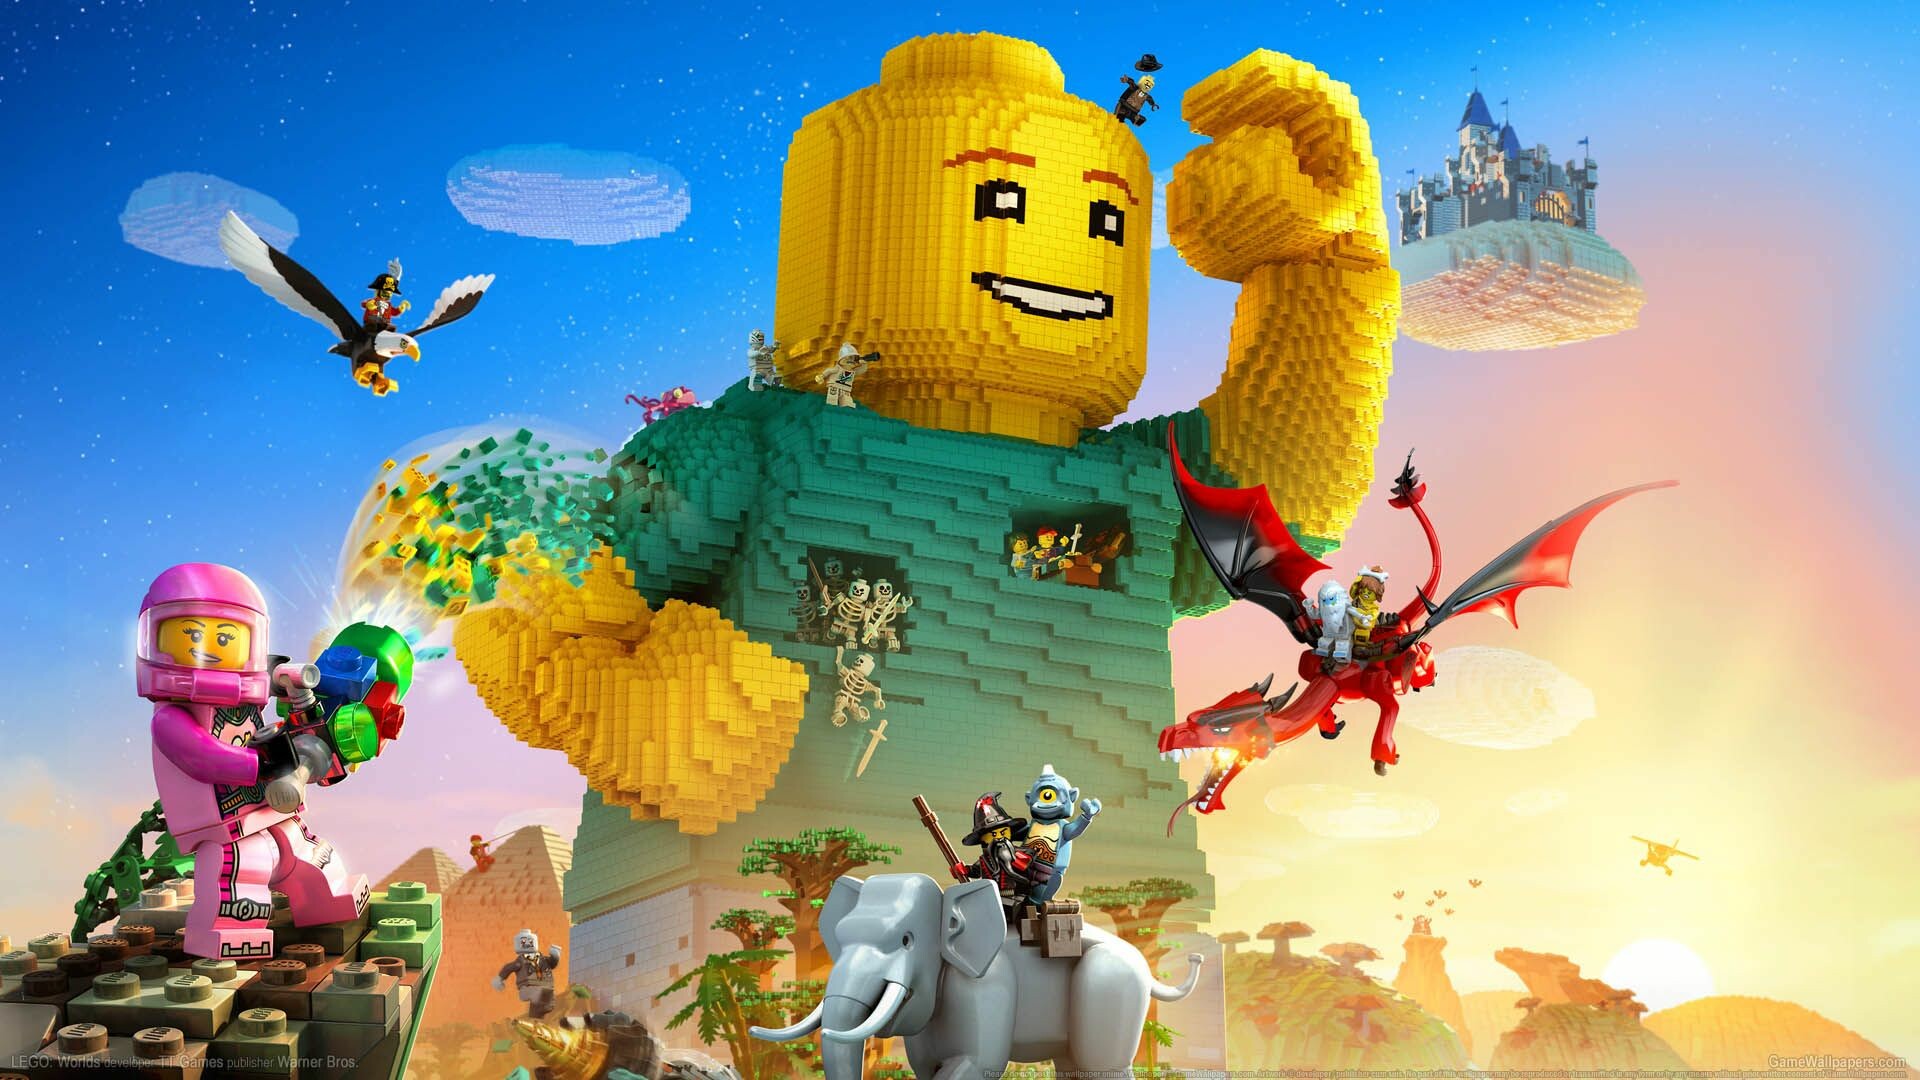 Lego: One of the most popular toys of all time. 1920x1080 Full HD Background.